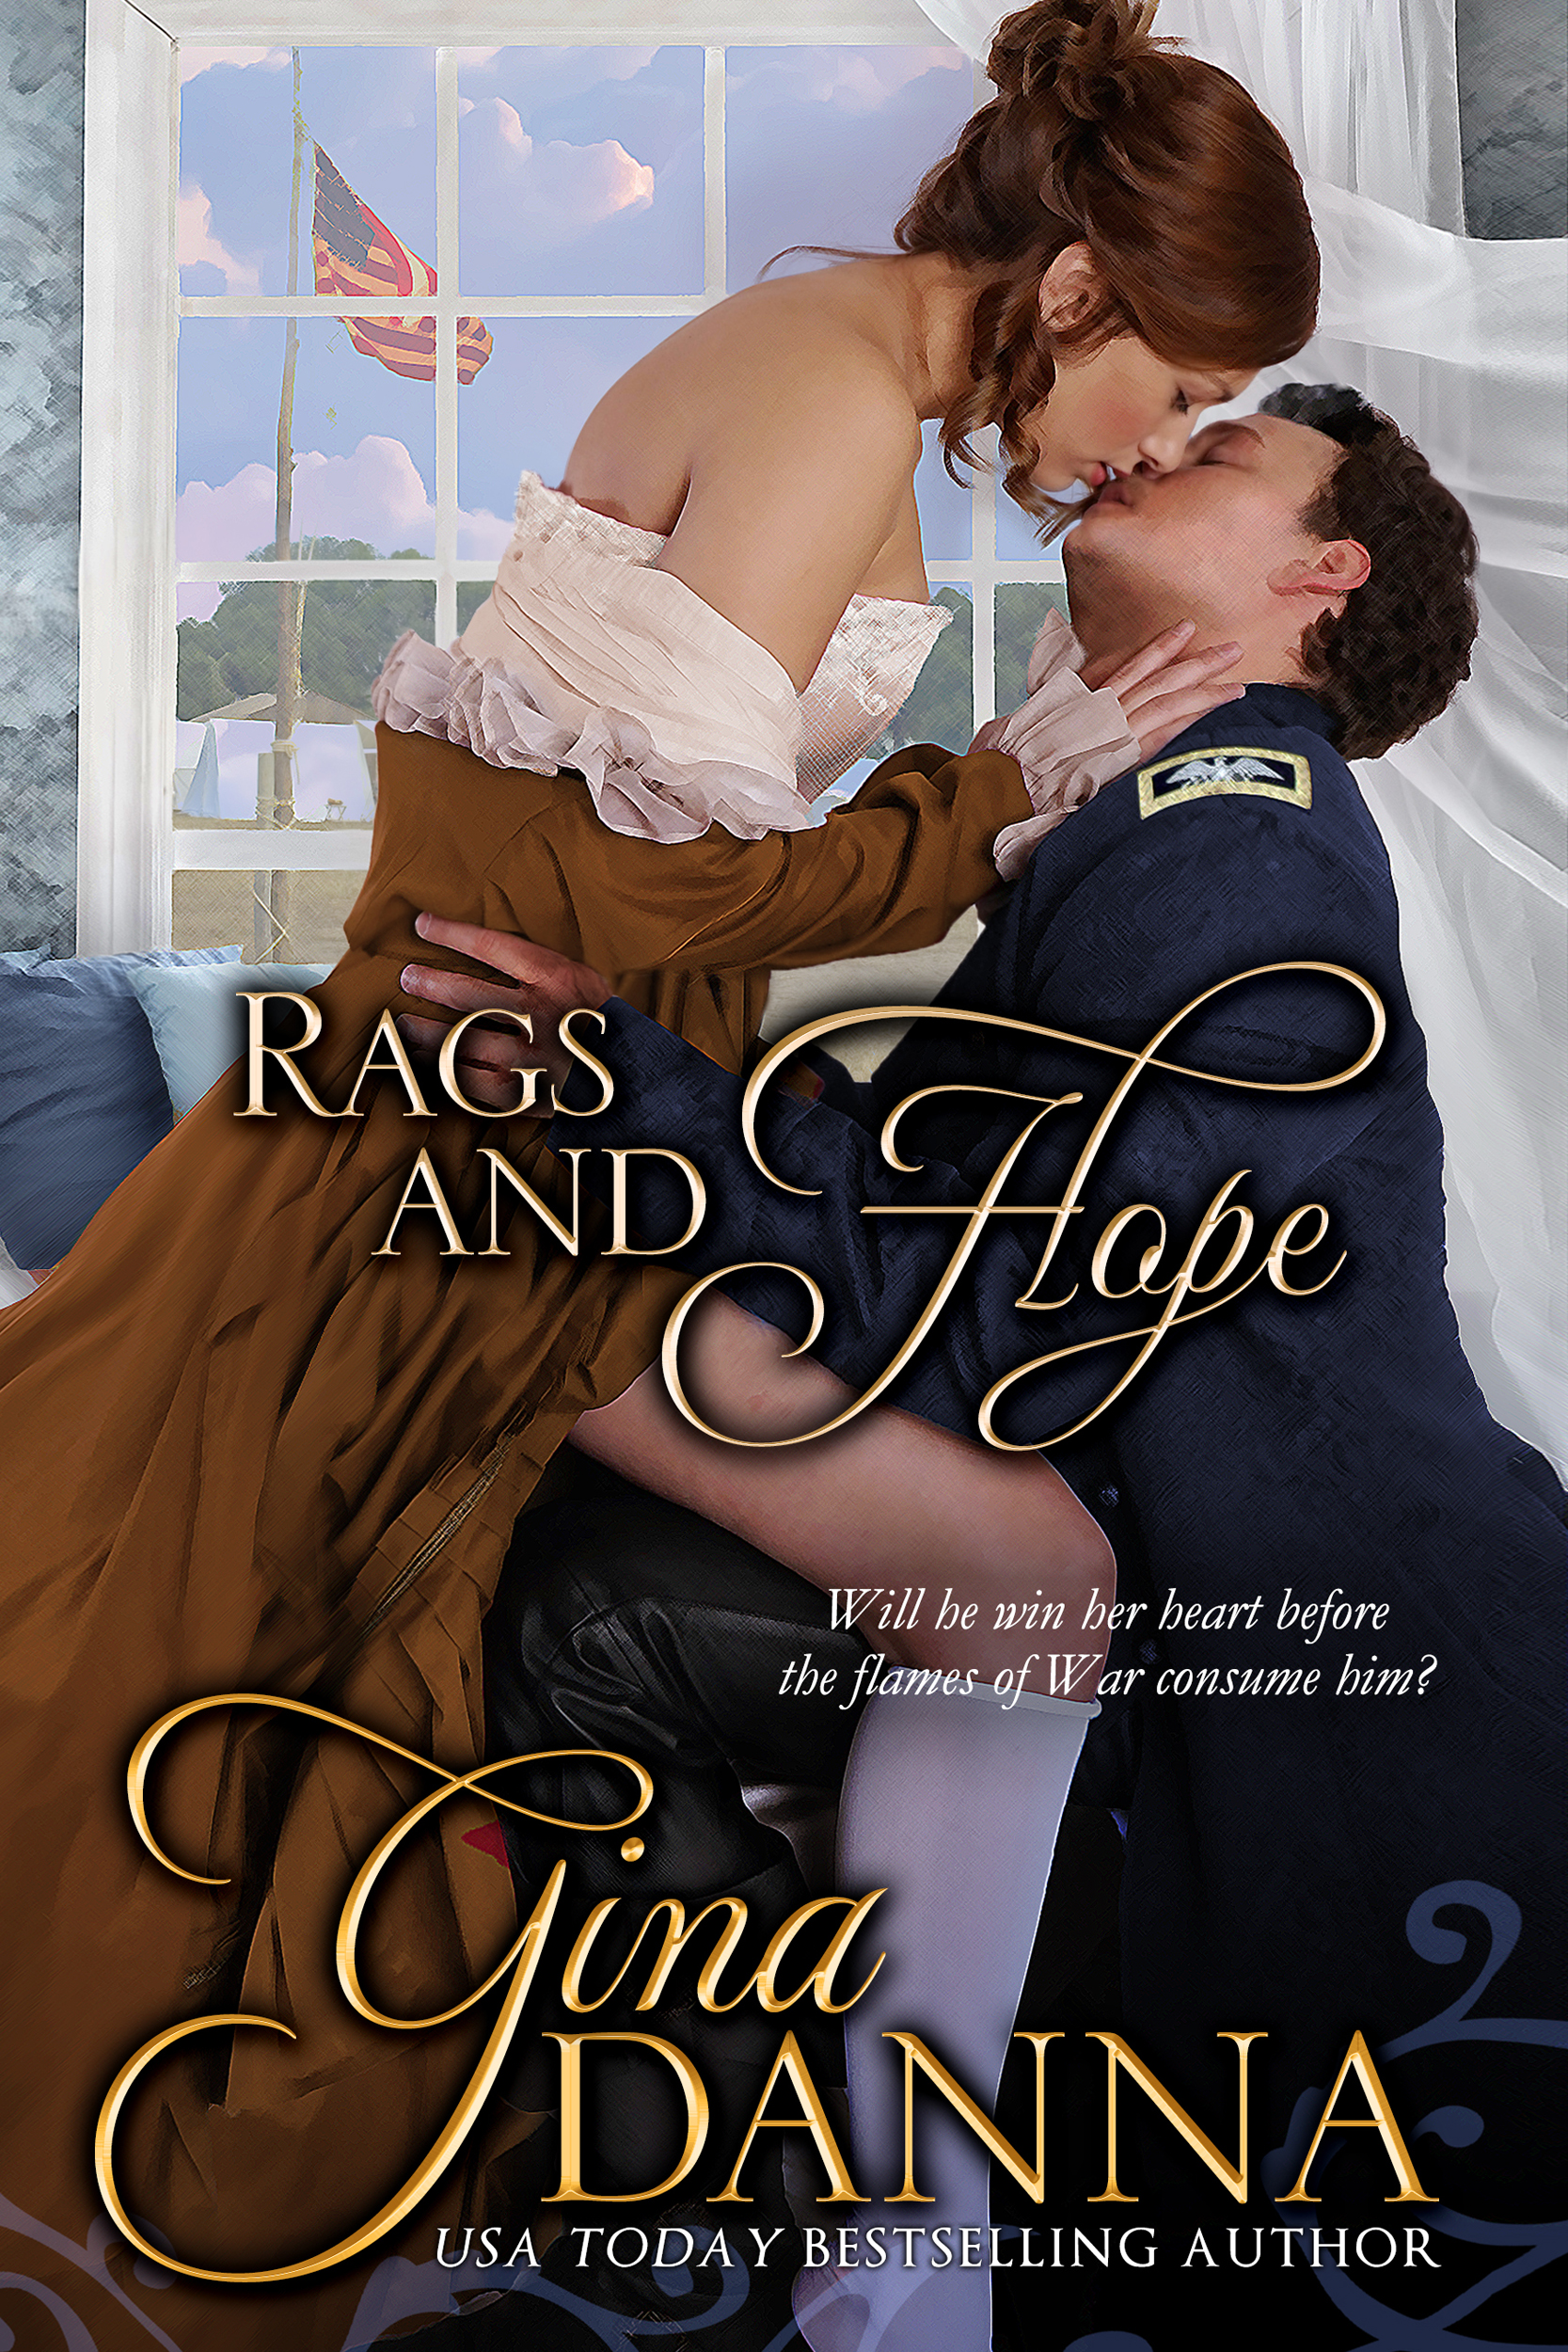 Cover for Rags and Hope by Gina Danna